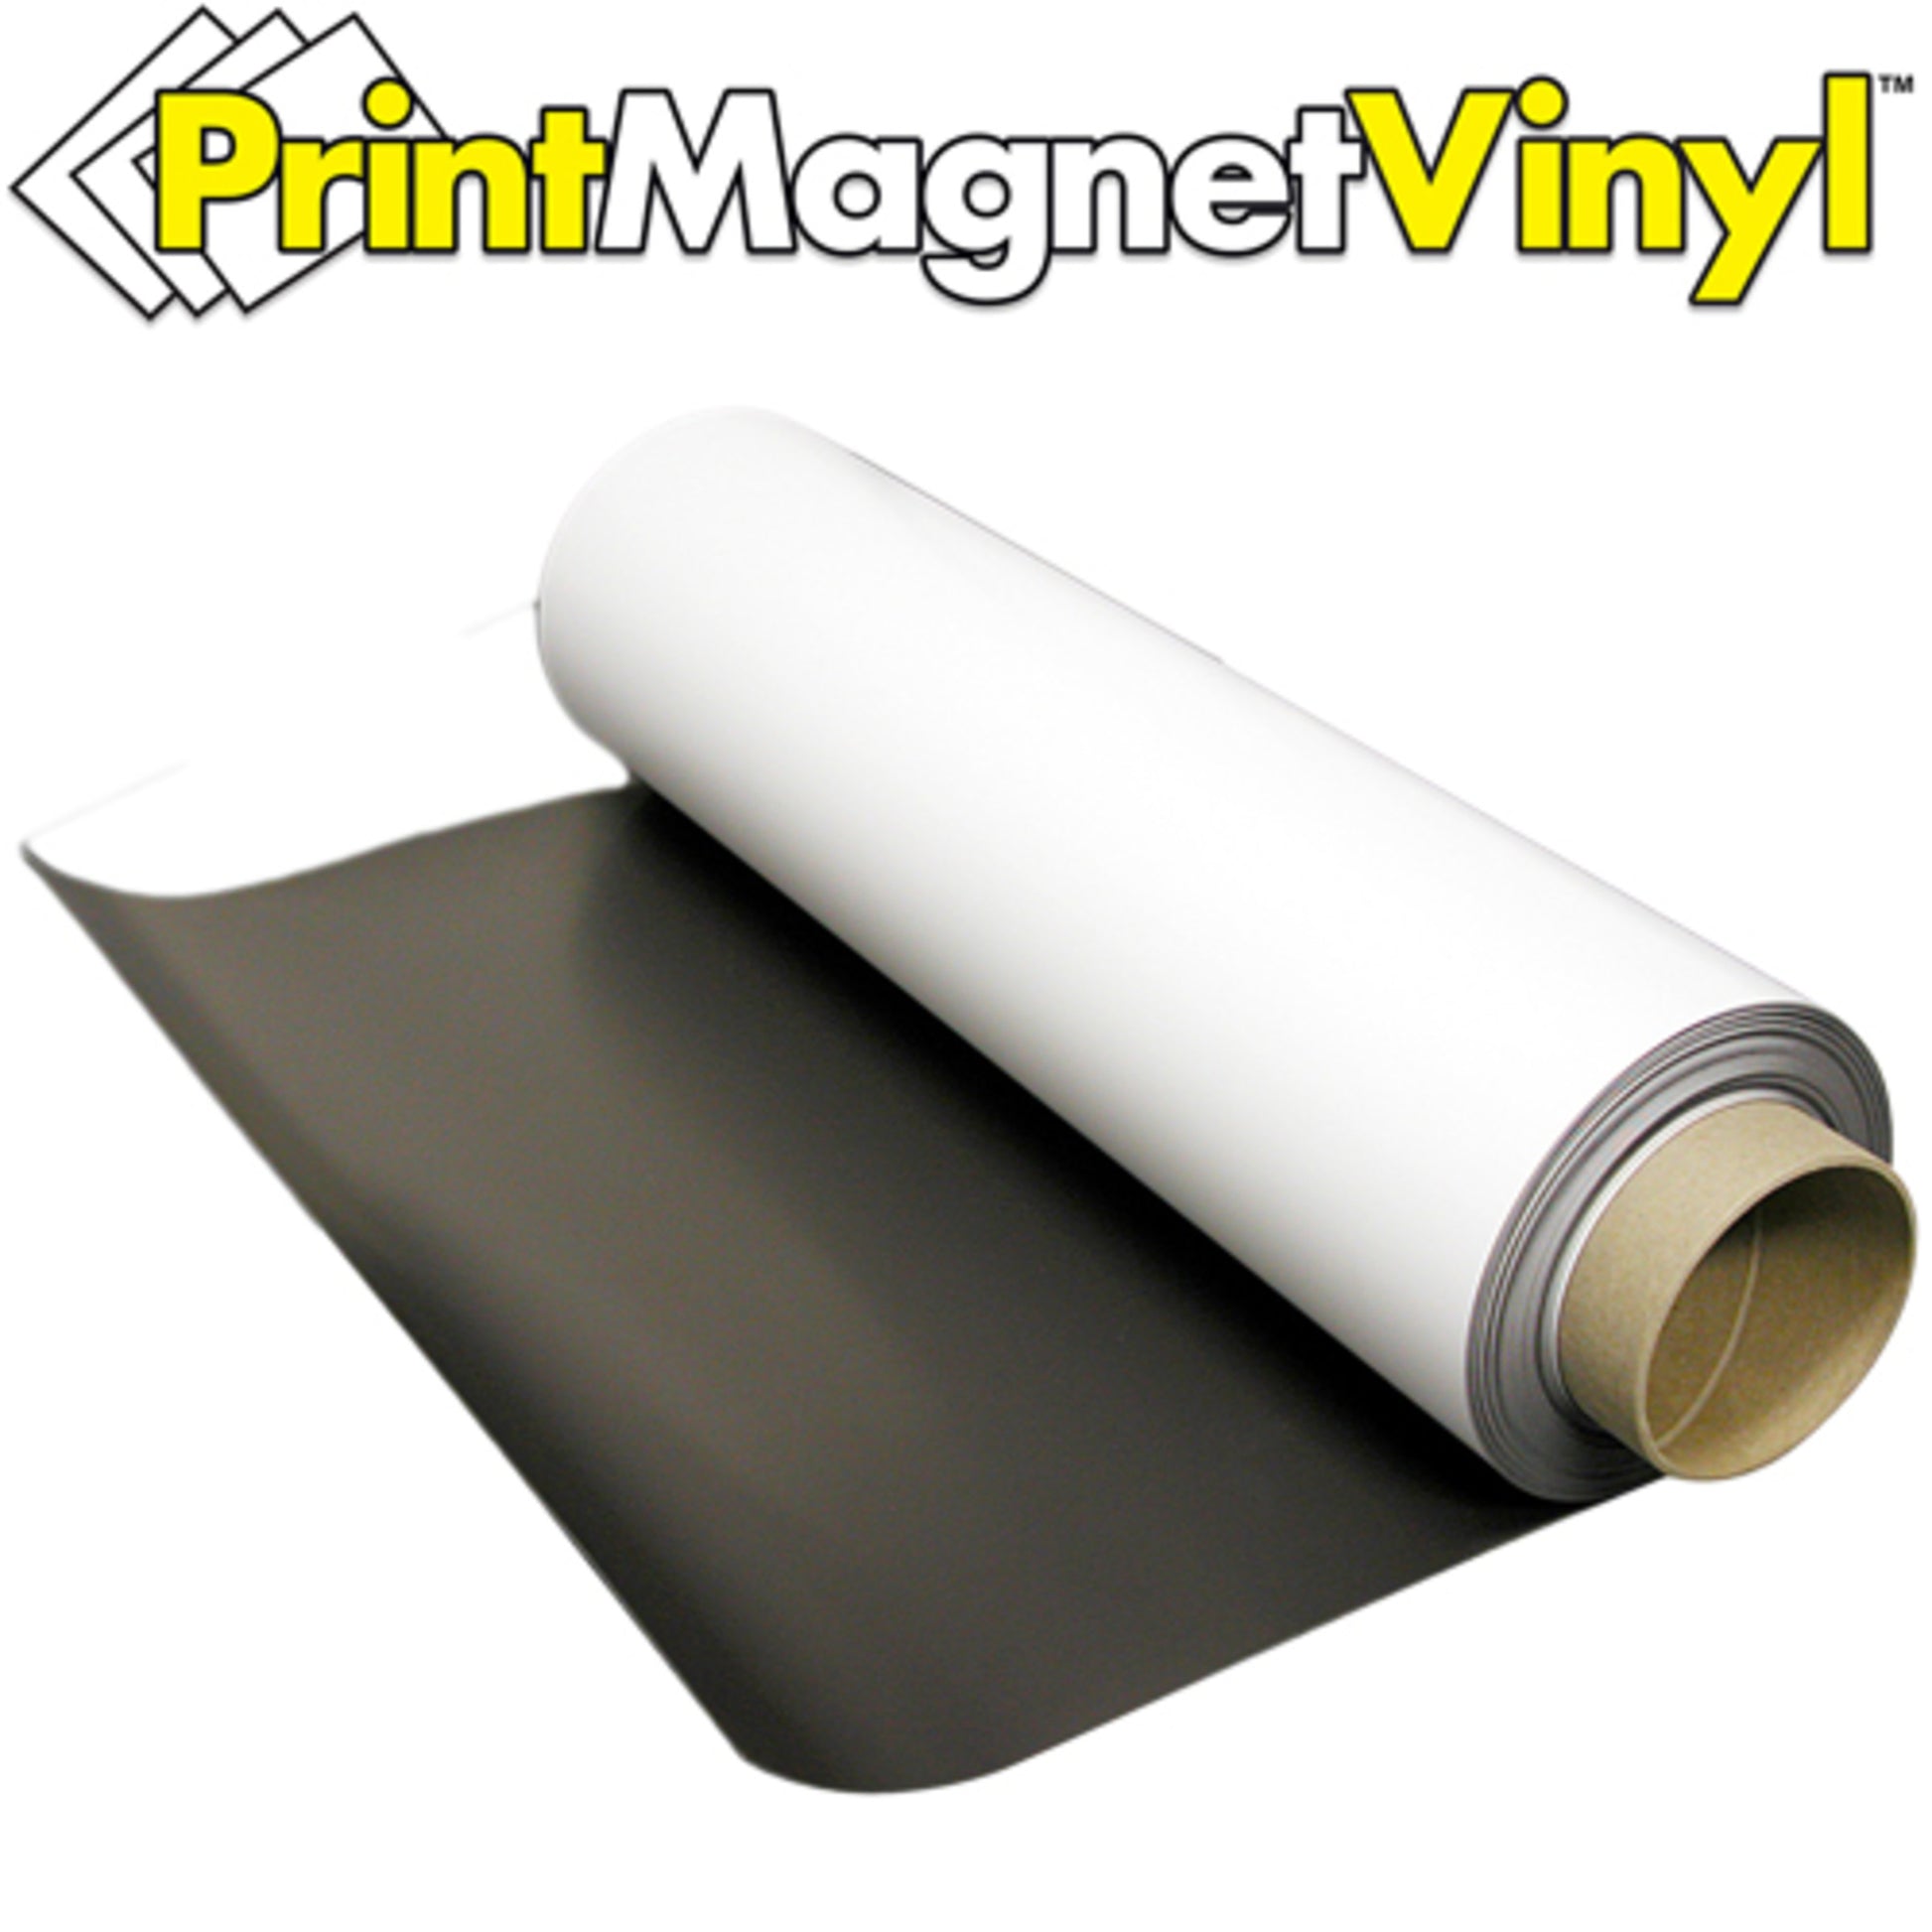 Load image into Gallery viewer, ZGN1224GW50 PrintMagnetVinyl™ Flexible Magnetic Sheet - 45 Degree Angle View